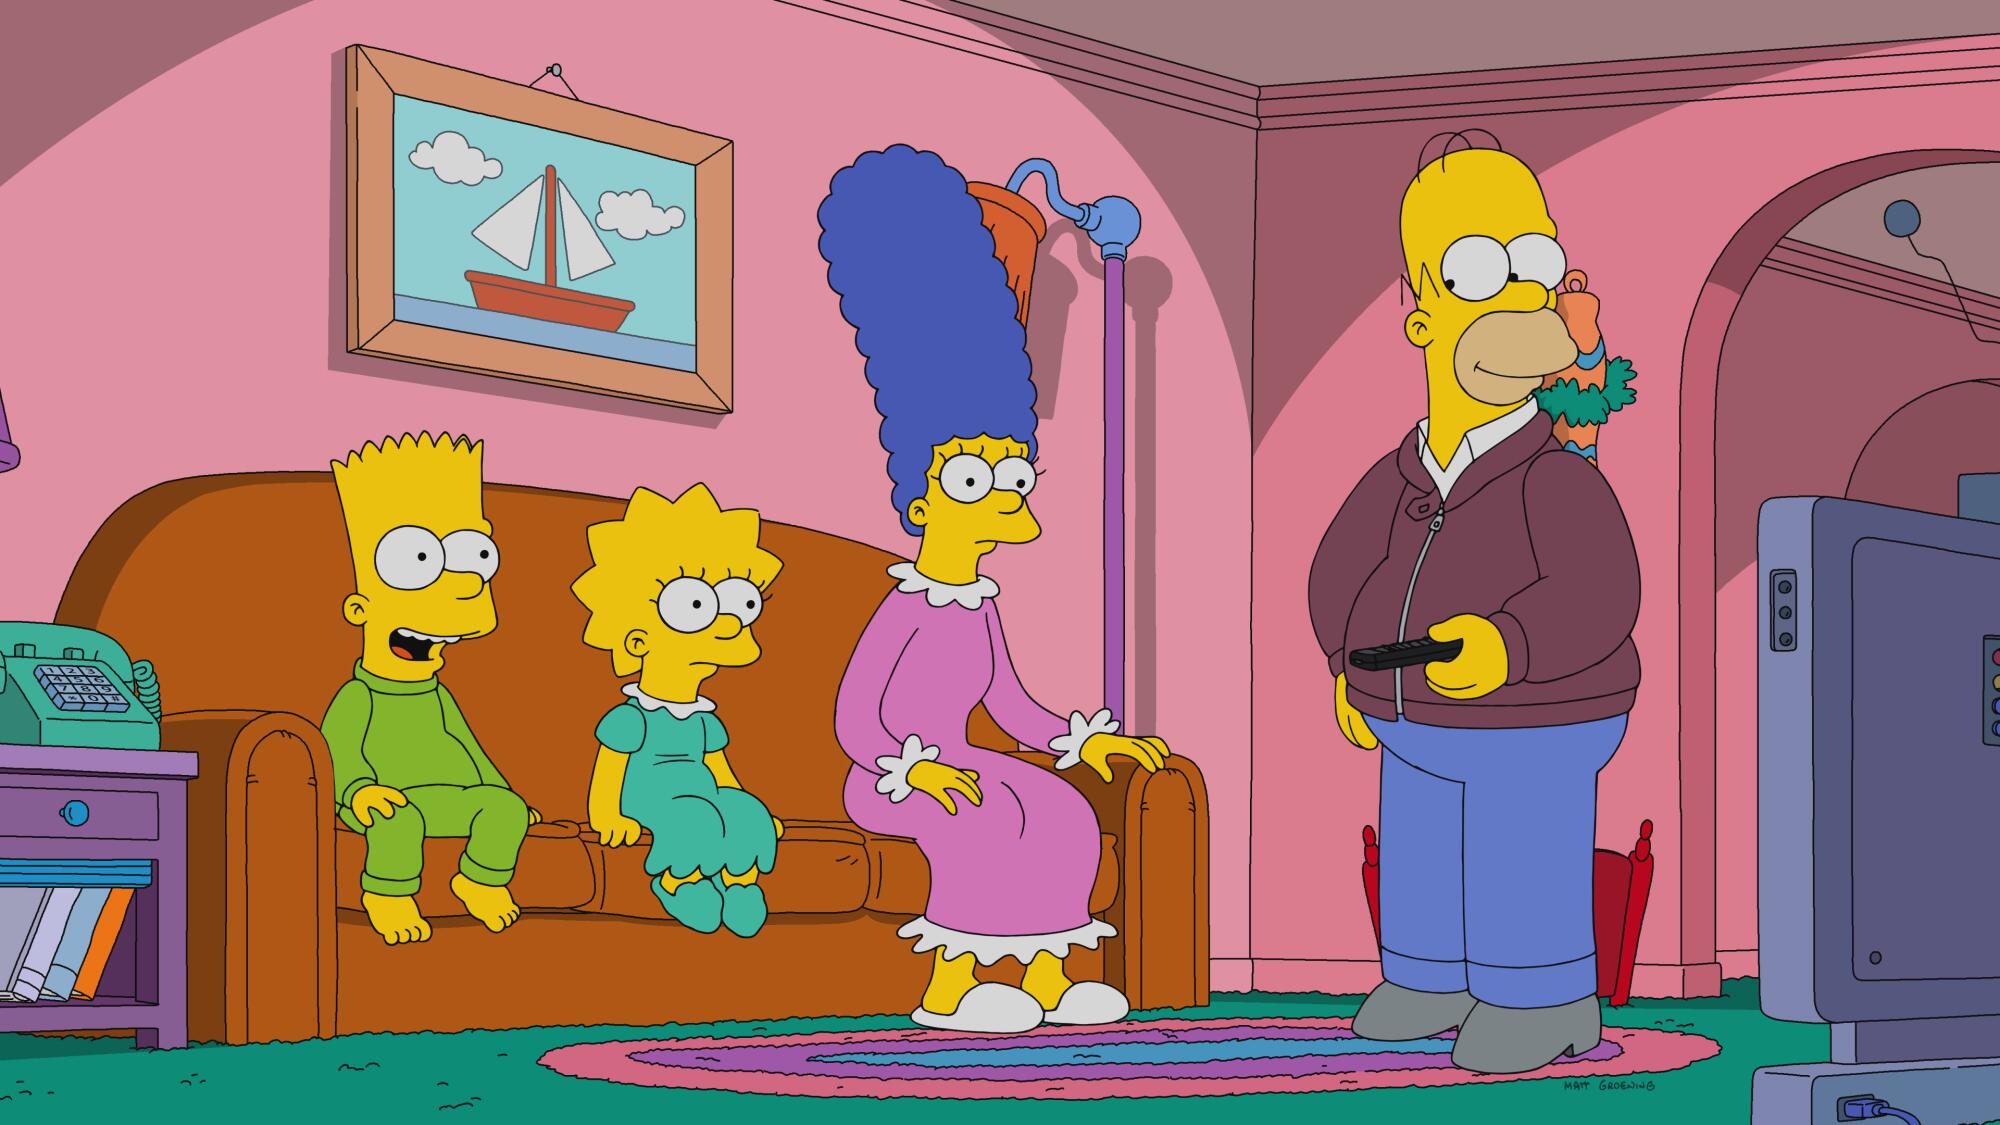 Bart, Lisa and Marge sitting on a sofa with Homer standing nearby